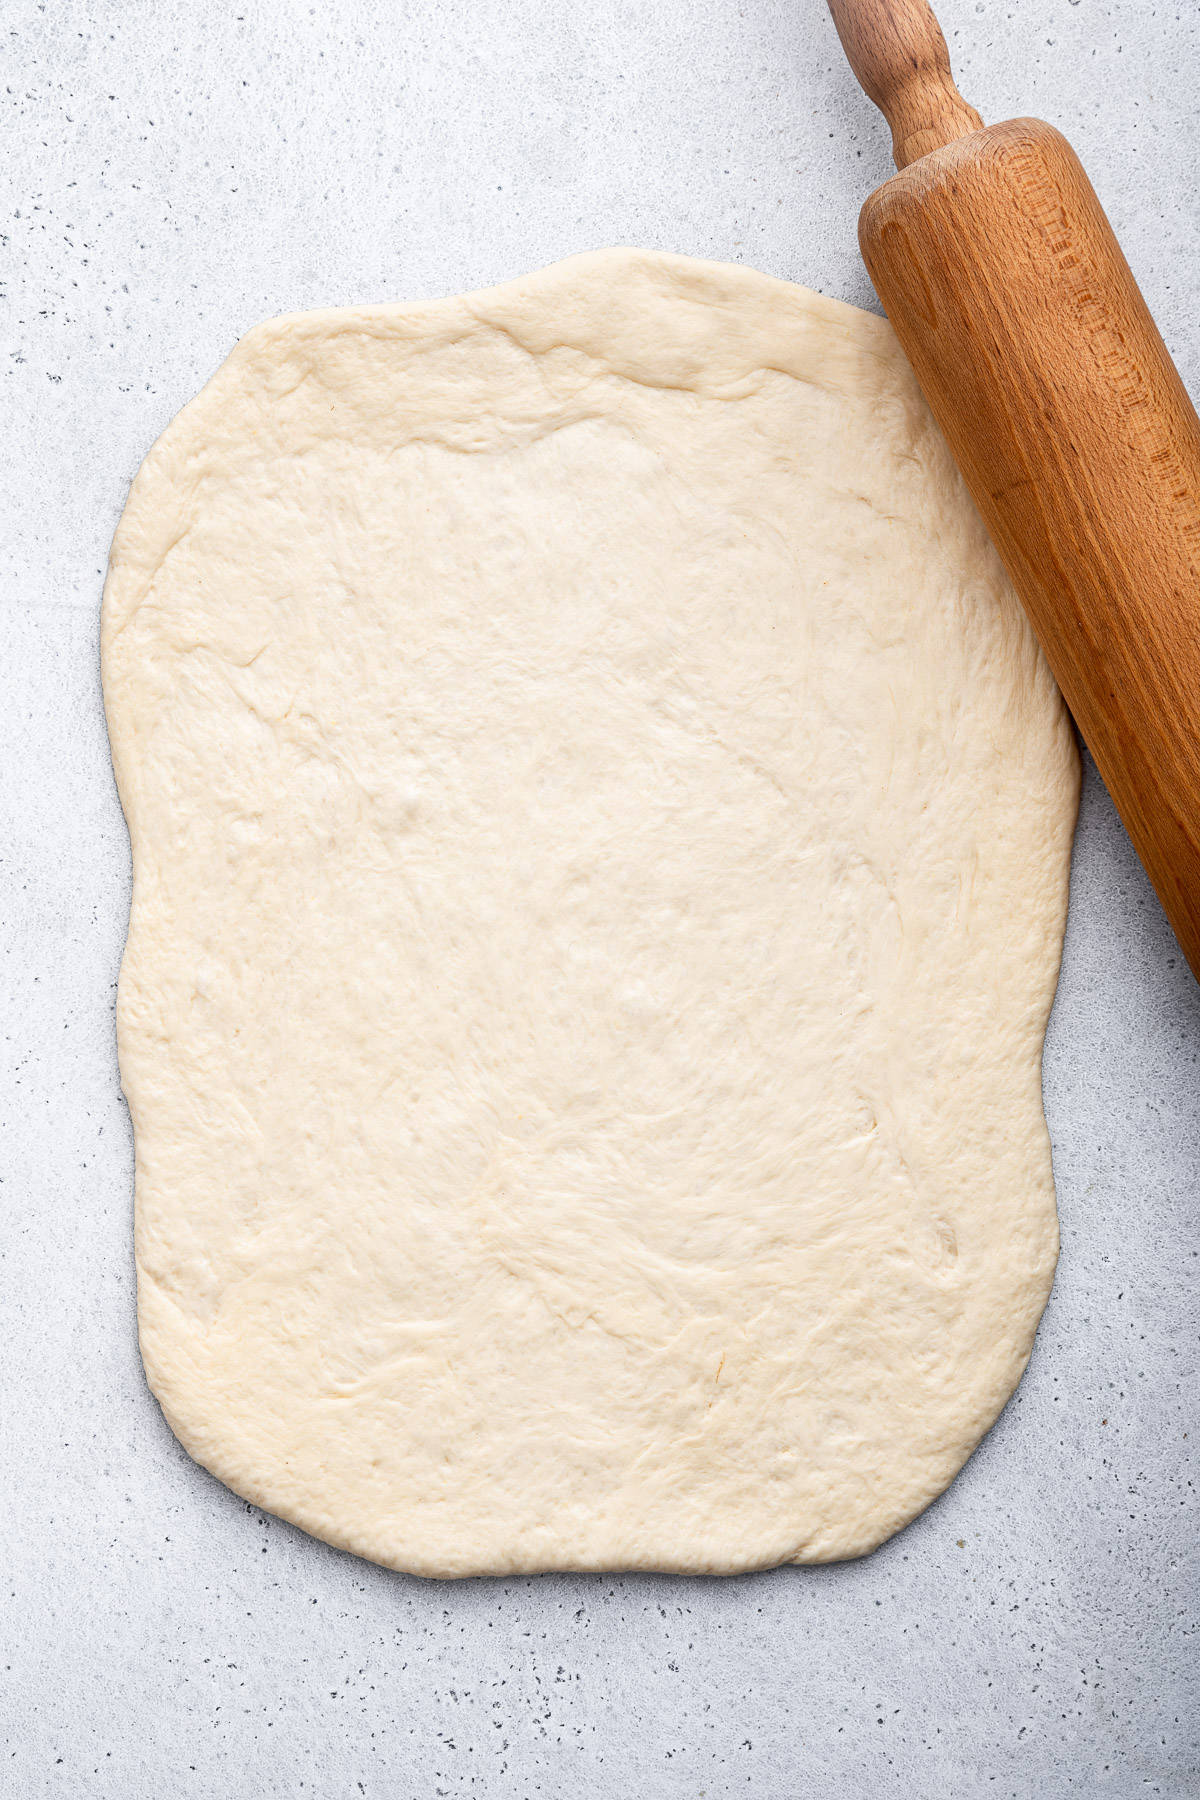 Rolling out bread dough with rolling pin.